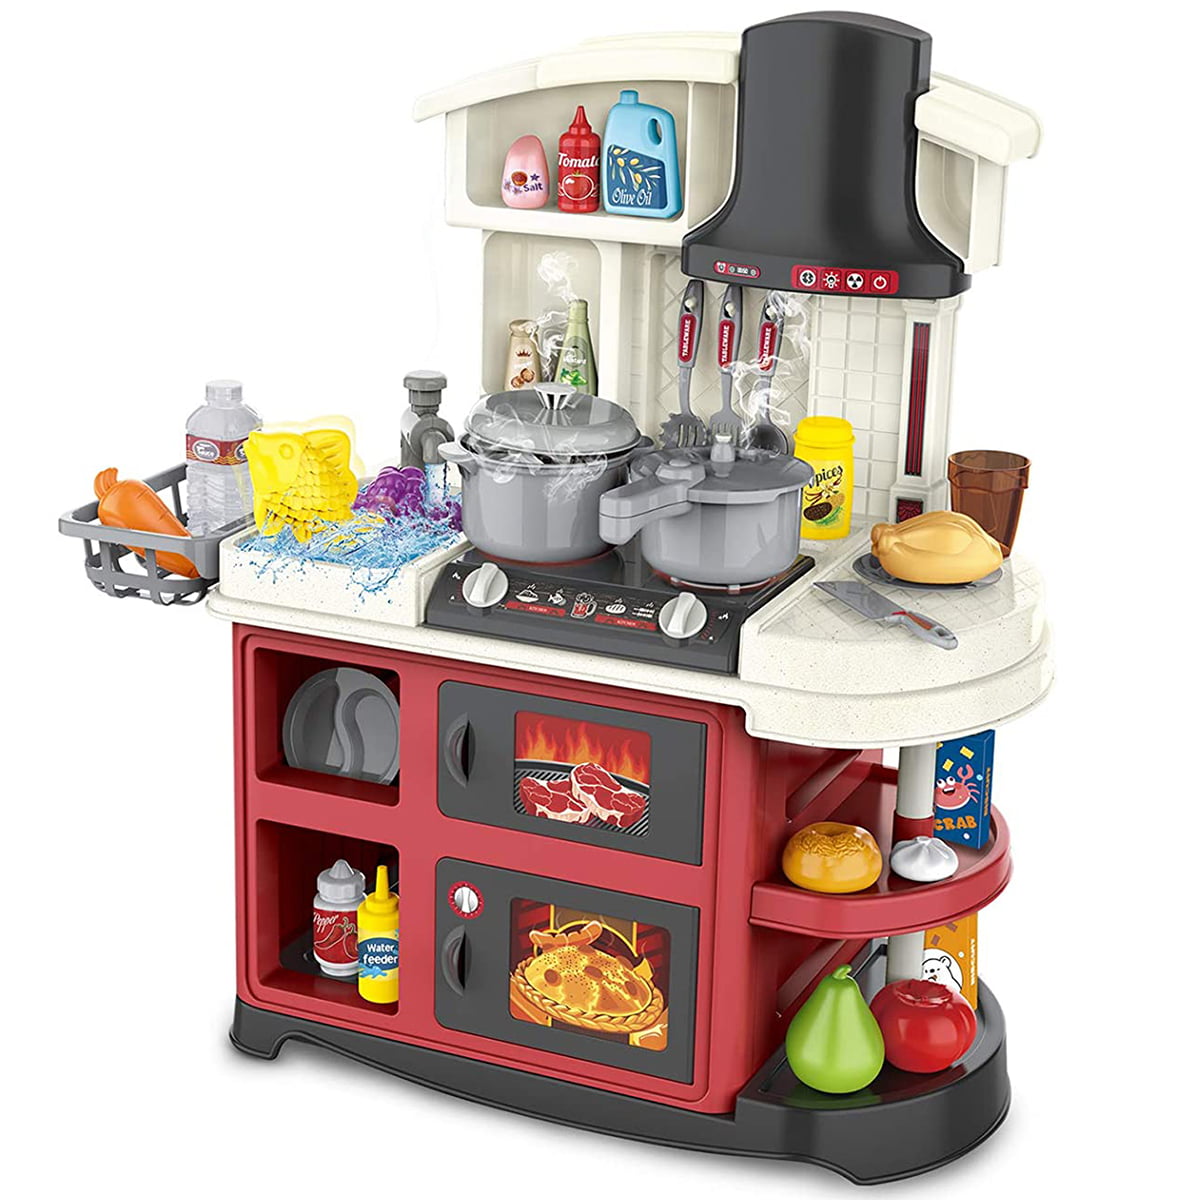 Large Red Toddler Boys Camping Kitchen Playset-Stove Dishes Food Utensils Teapot 